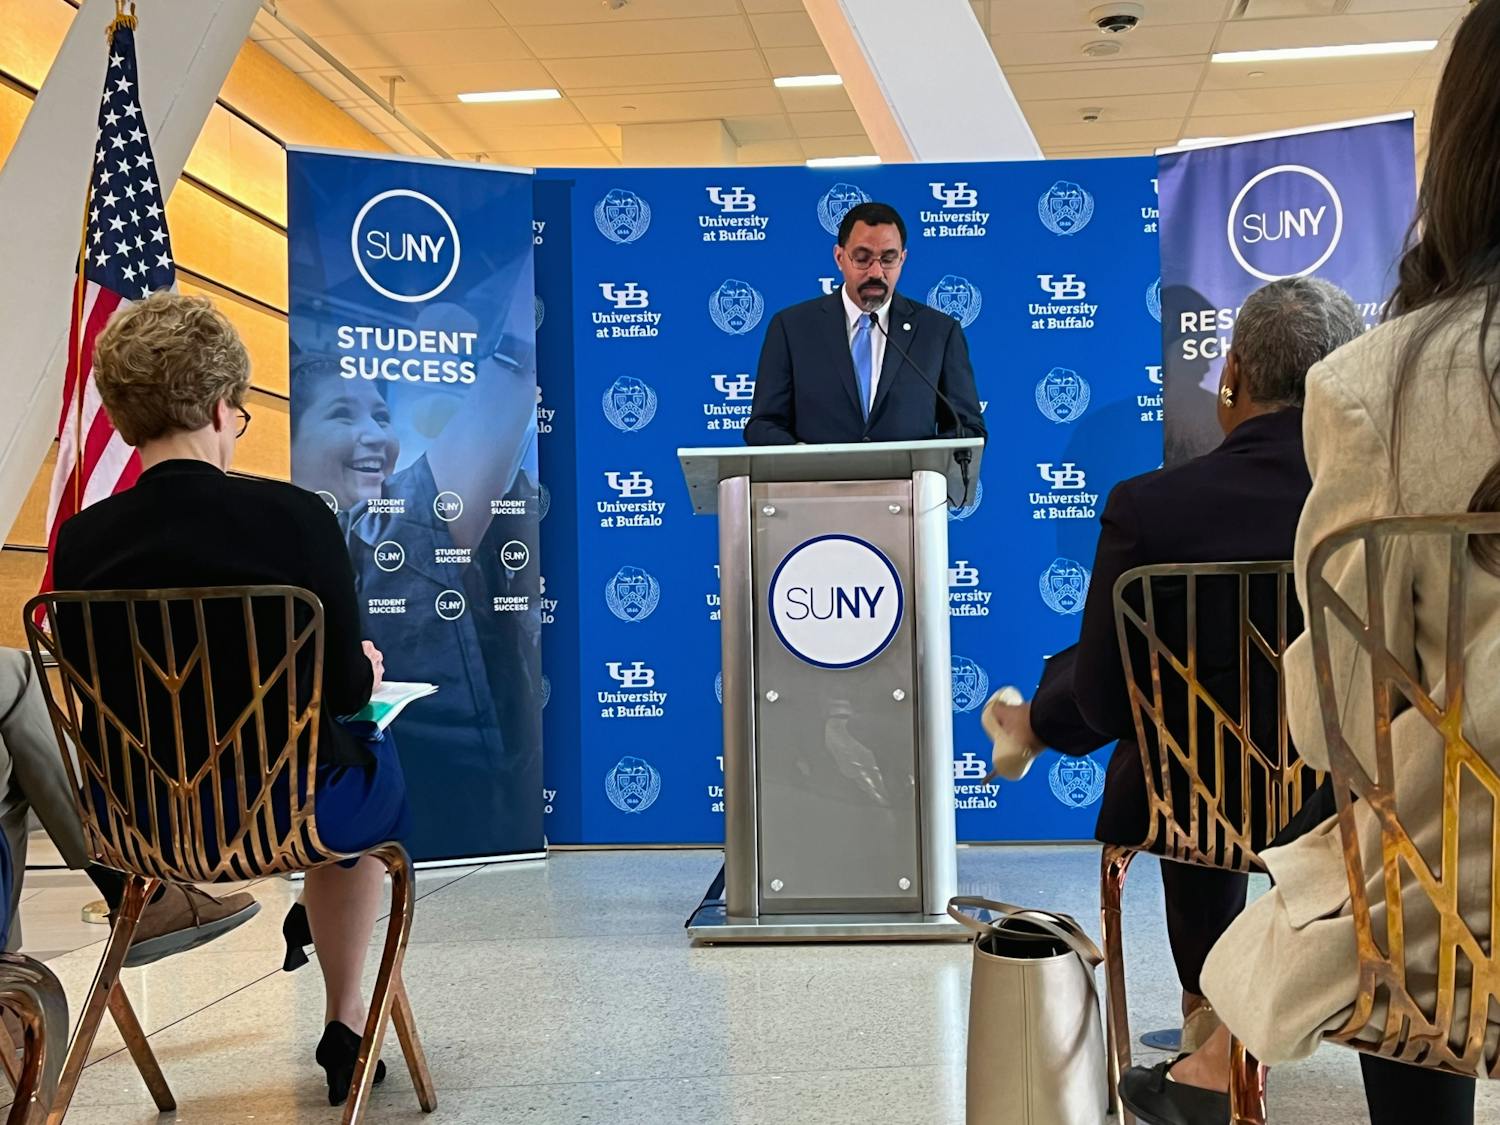 SUNY Chancellor John King addressed local media during a press conference in the atrium of UB's downtown campus.&nbsp;